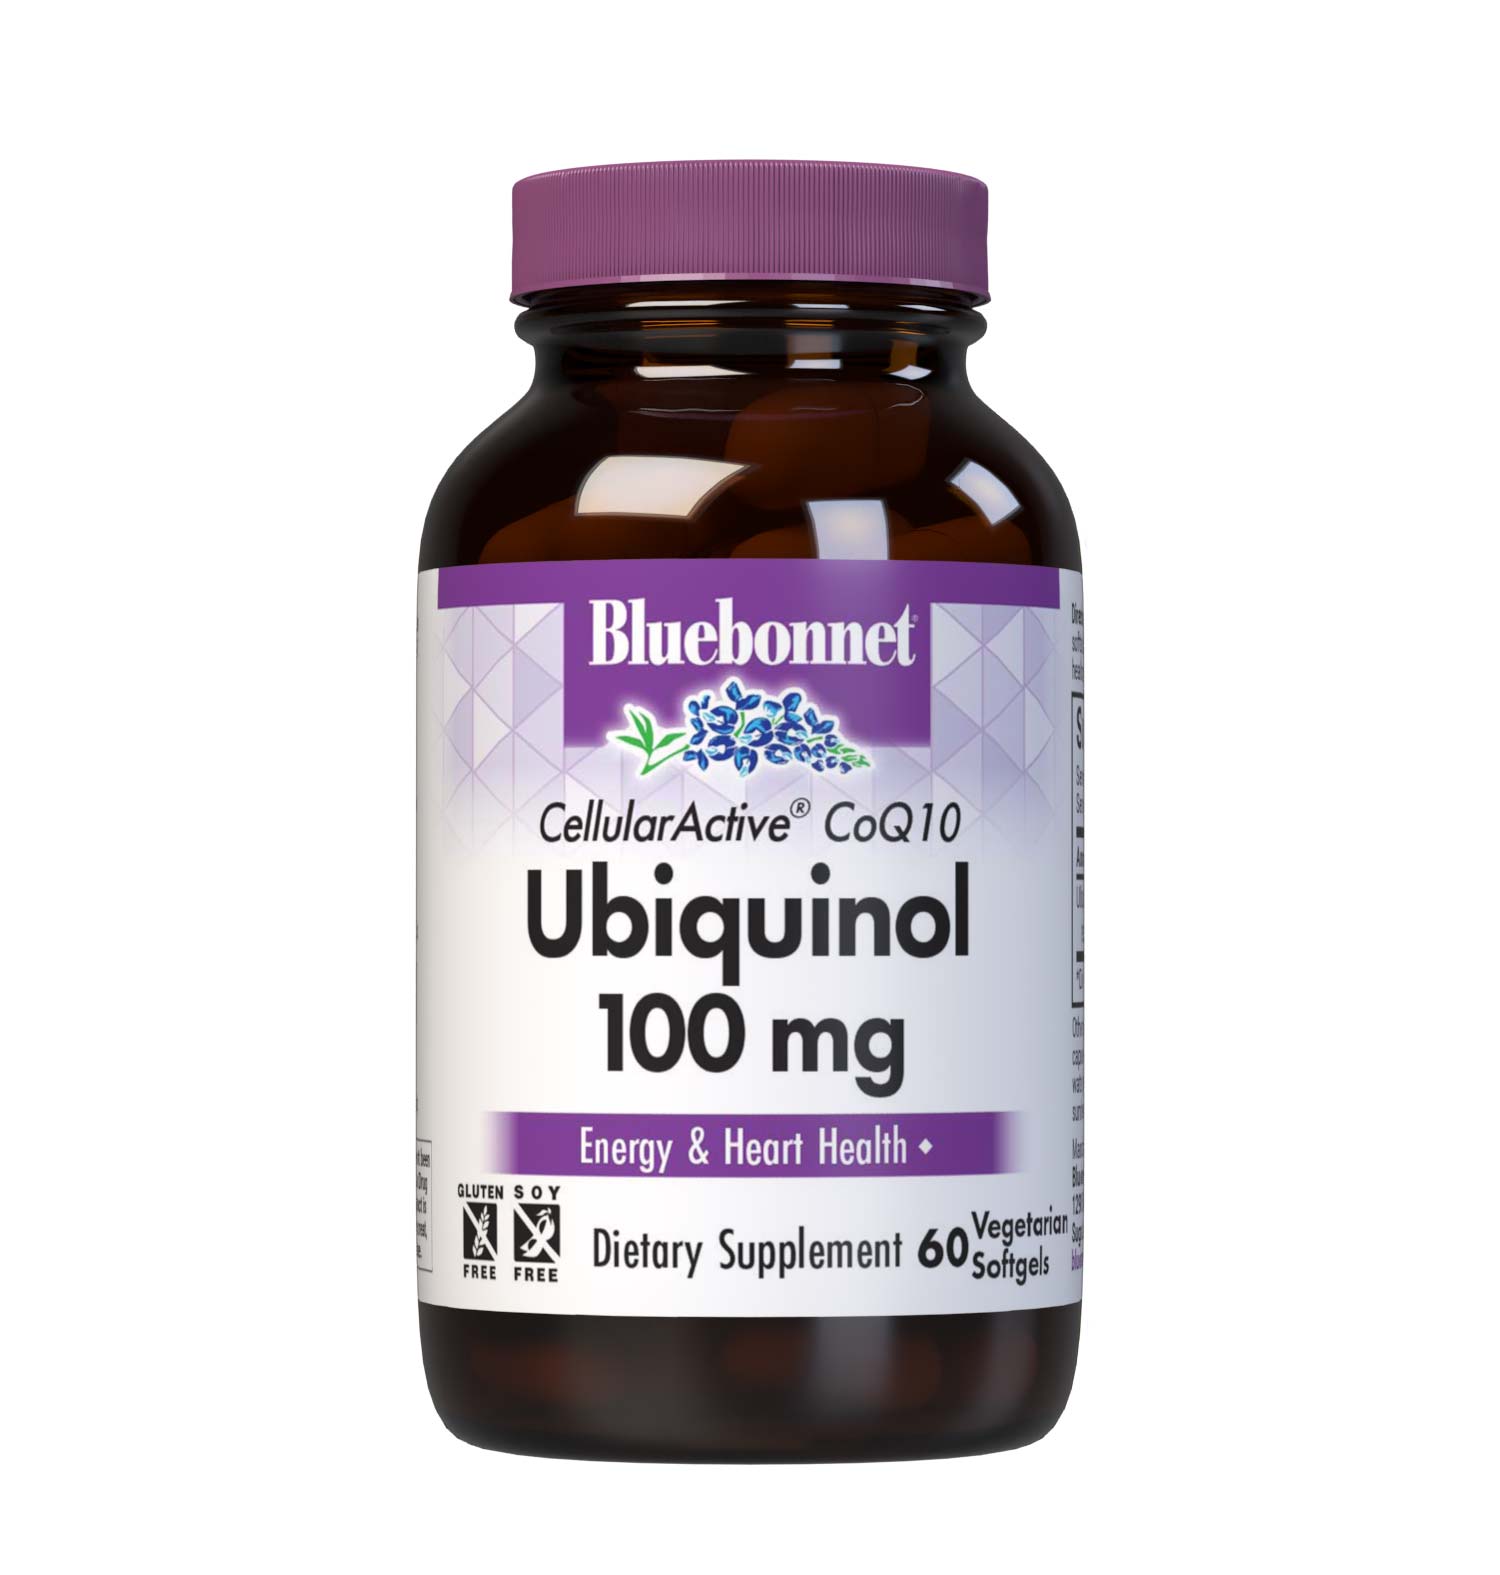 Bluebonnet’s CellularActive CoQ10 Ubiquinol 60 Vegetarian Softgels are formulated with the active antioxidant form of CoQ10 (ubiquinol) which may support energy levels and heart health. #size_60 count